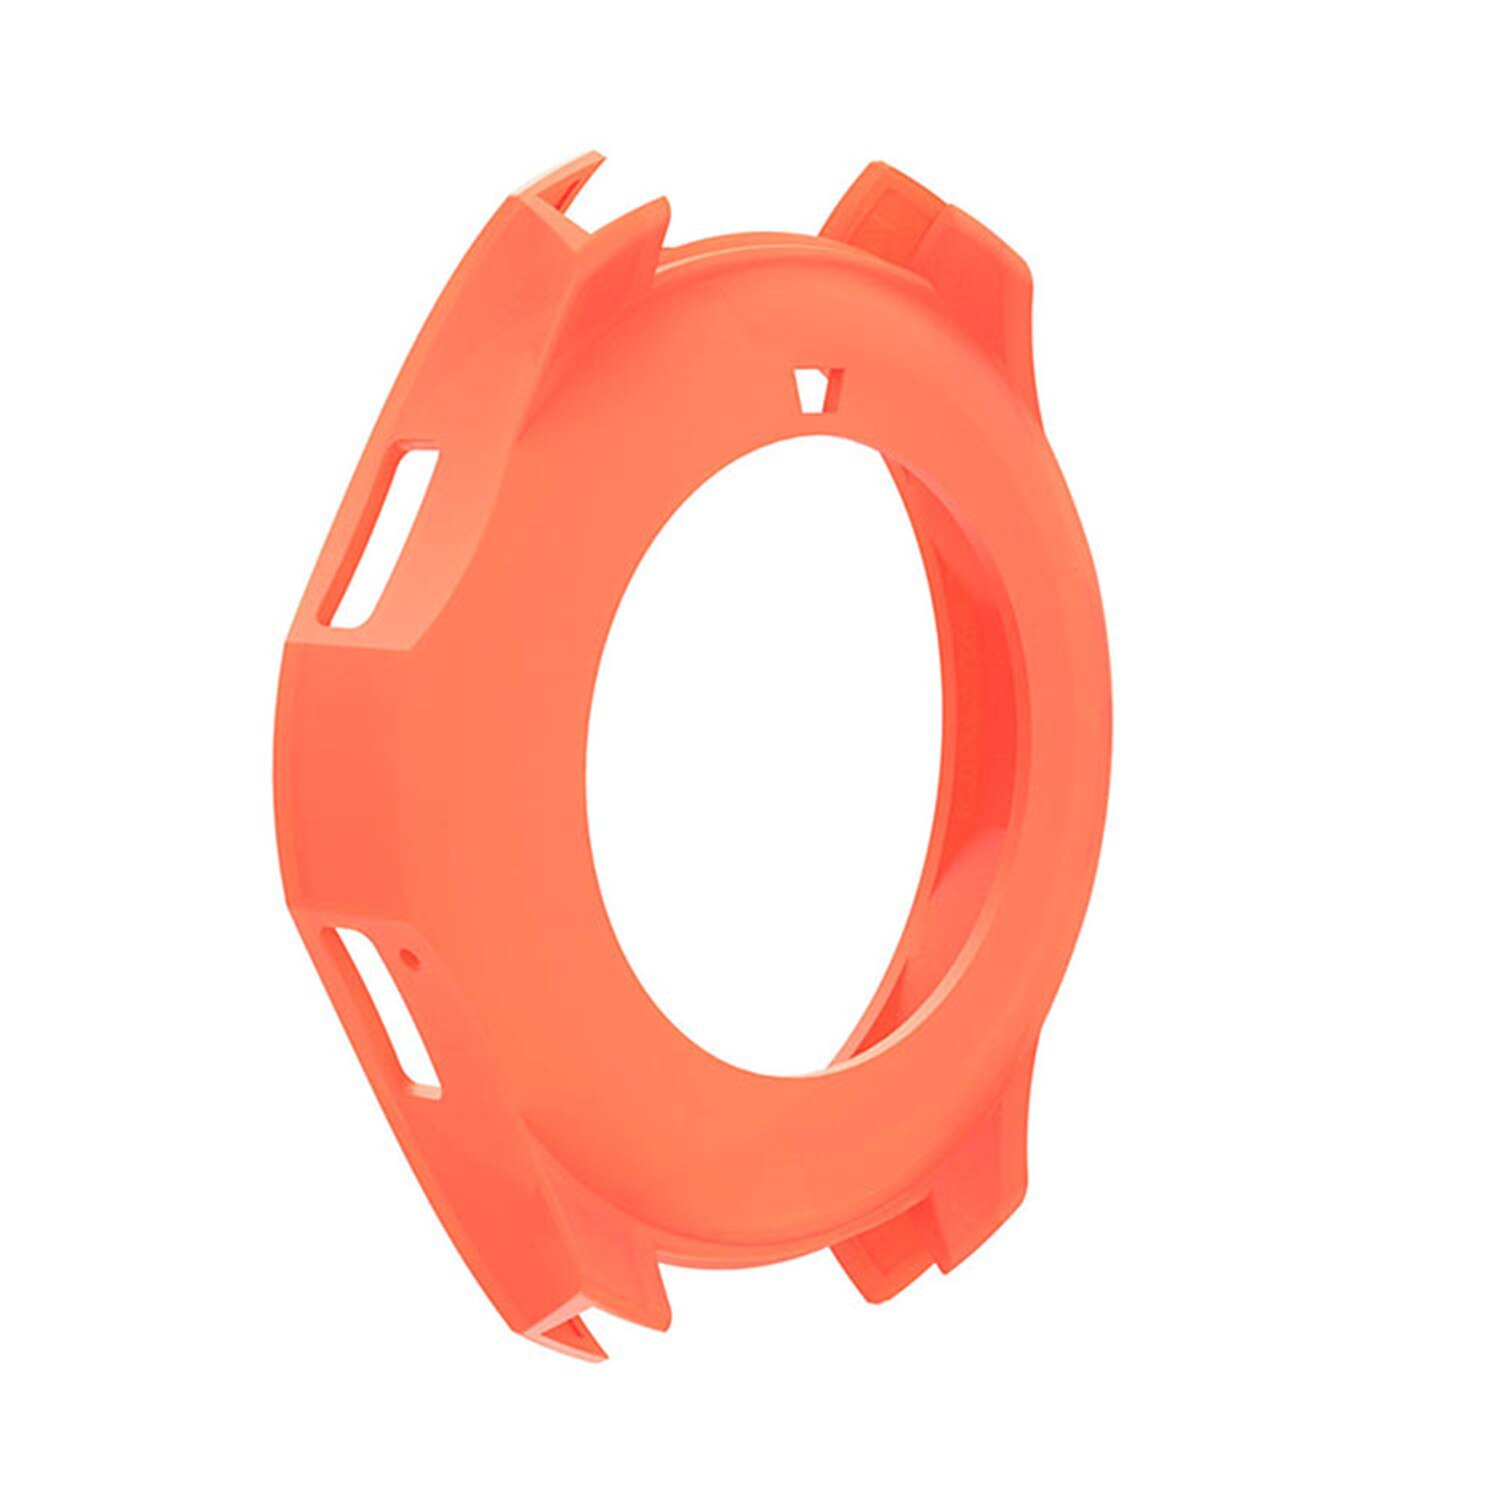 Silicone Watch Case for Samsung Galaxy Gear S3 Frontier Smart Watch Protective Cover for Galaxy Watch 46mm Case: Orange